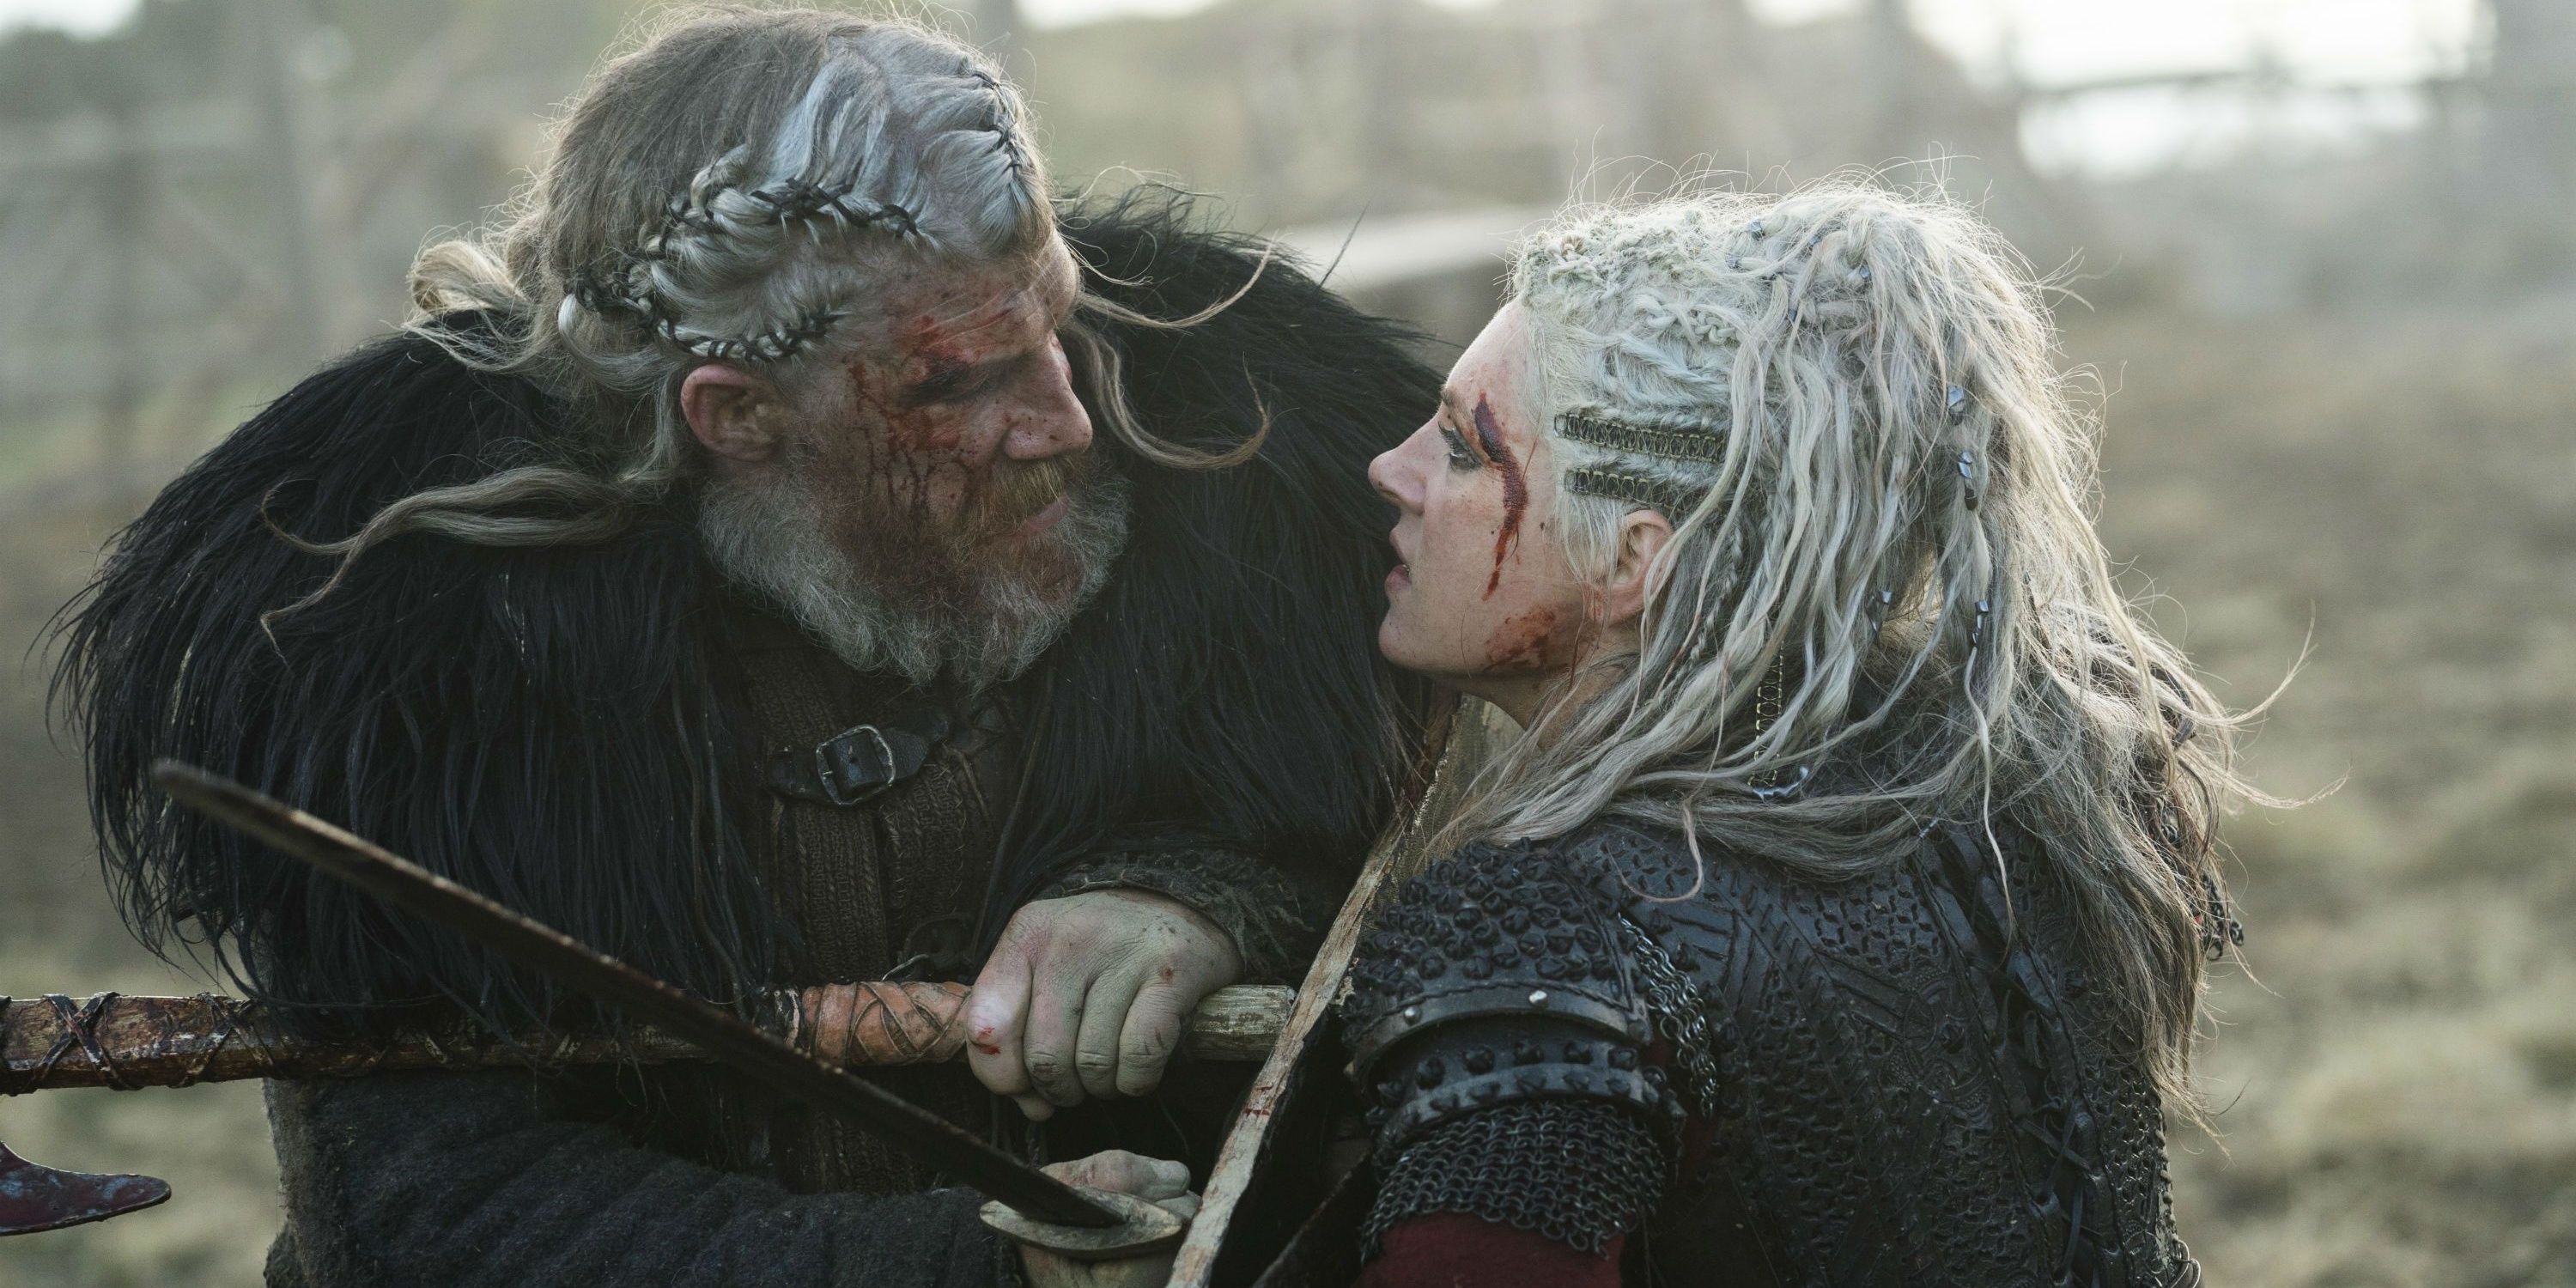 Lagertha fights with White Hair before killing him